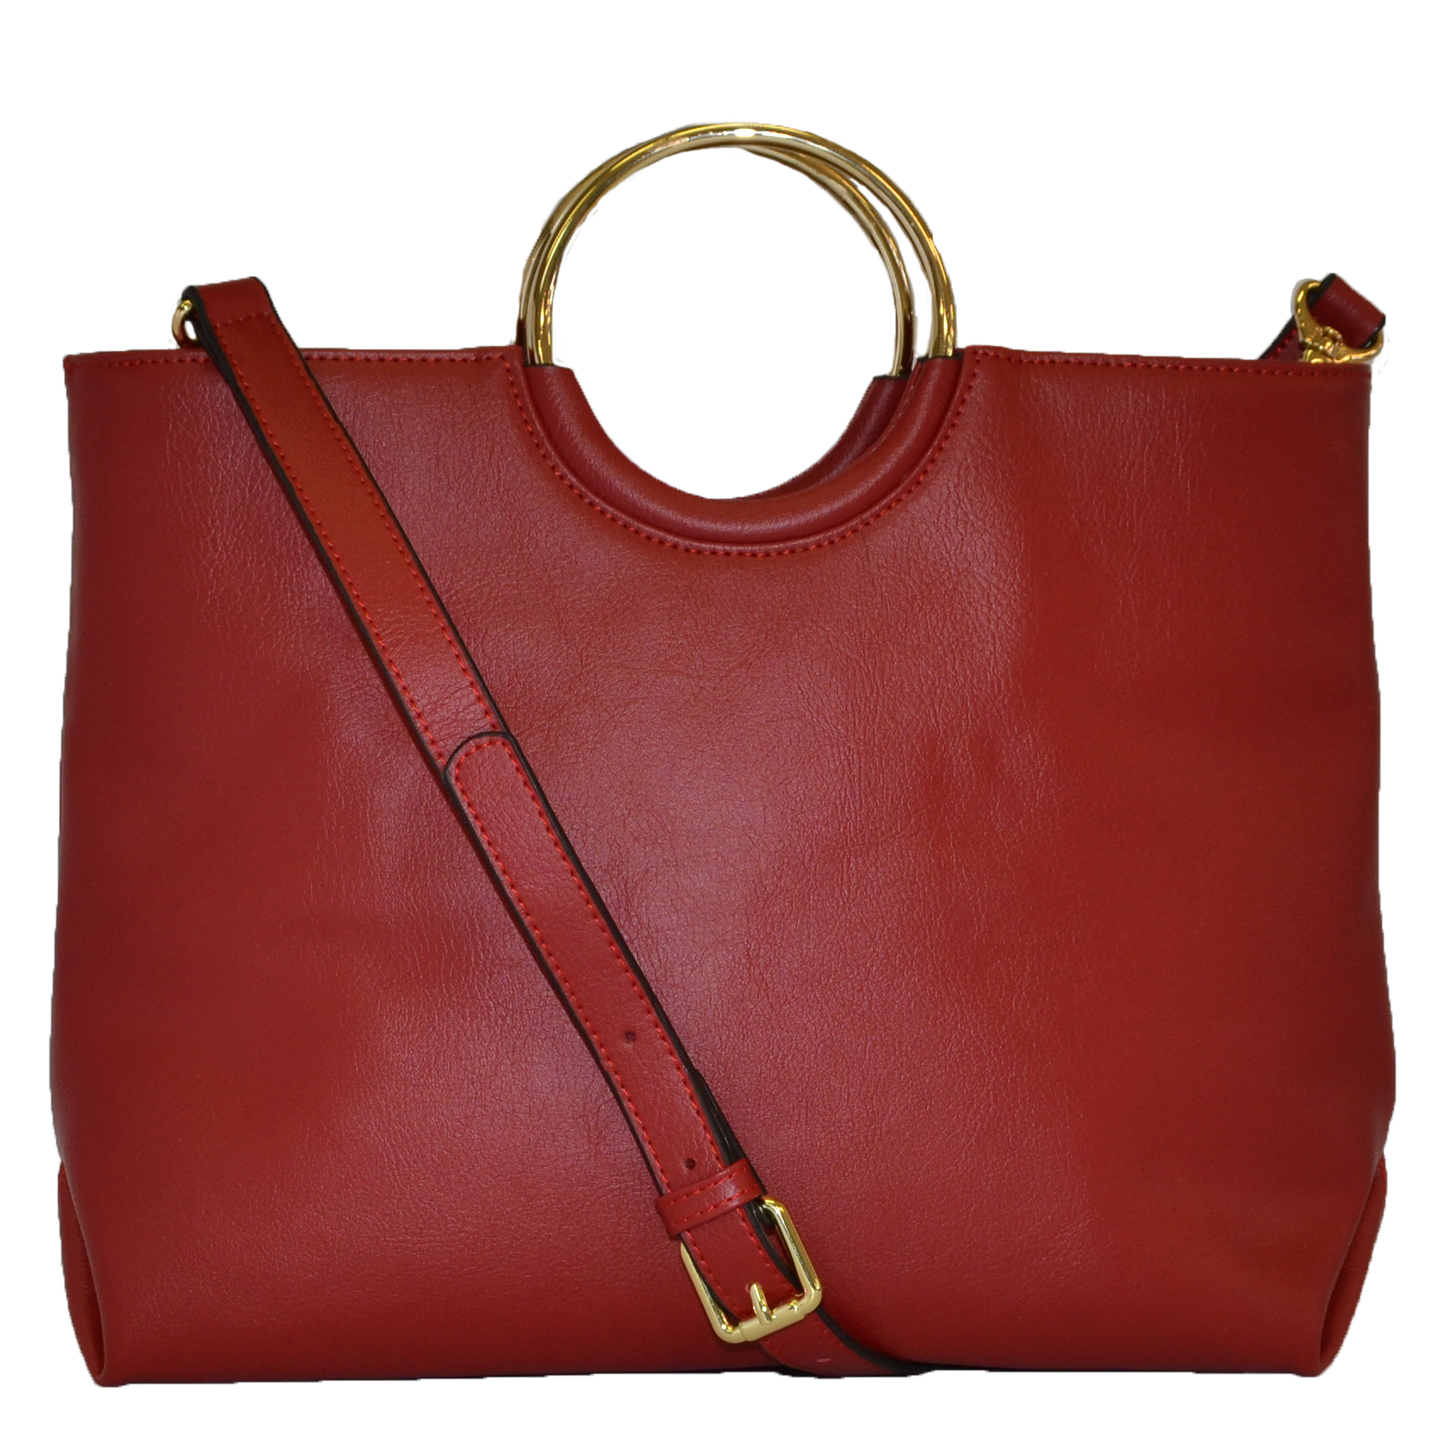 Millfield - Womens rED Leather Ring Handle Tote Shoulder Crossbody Bag - BeltNBags